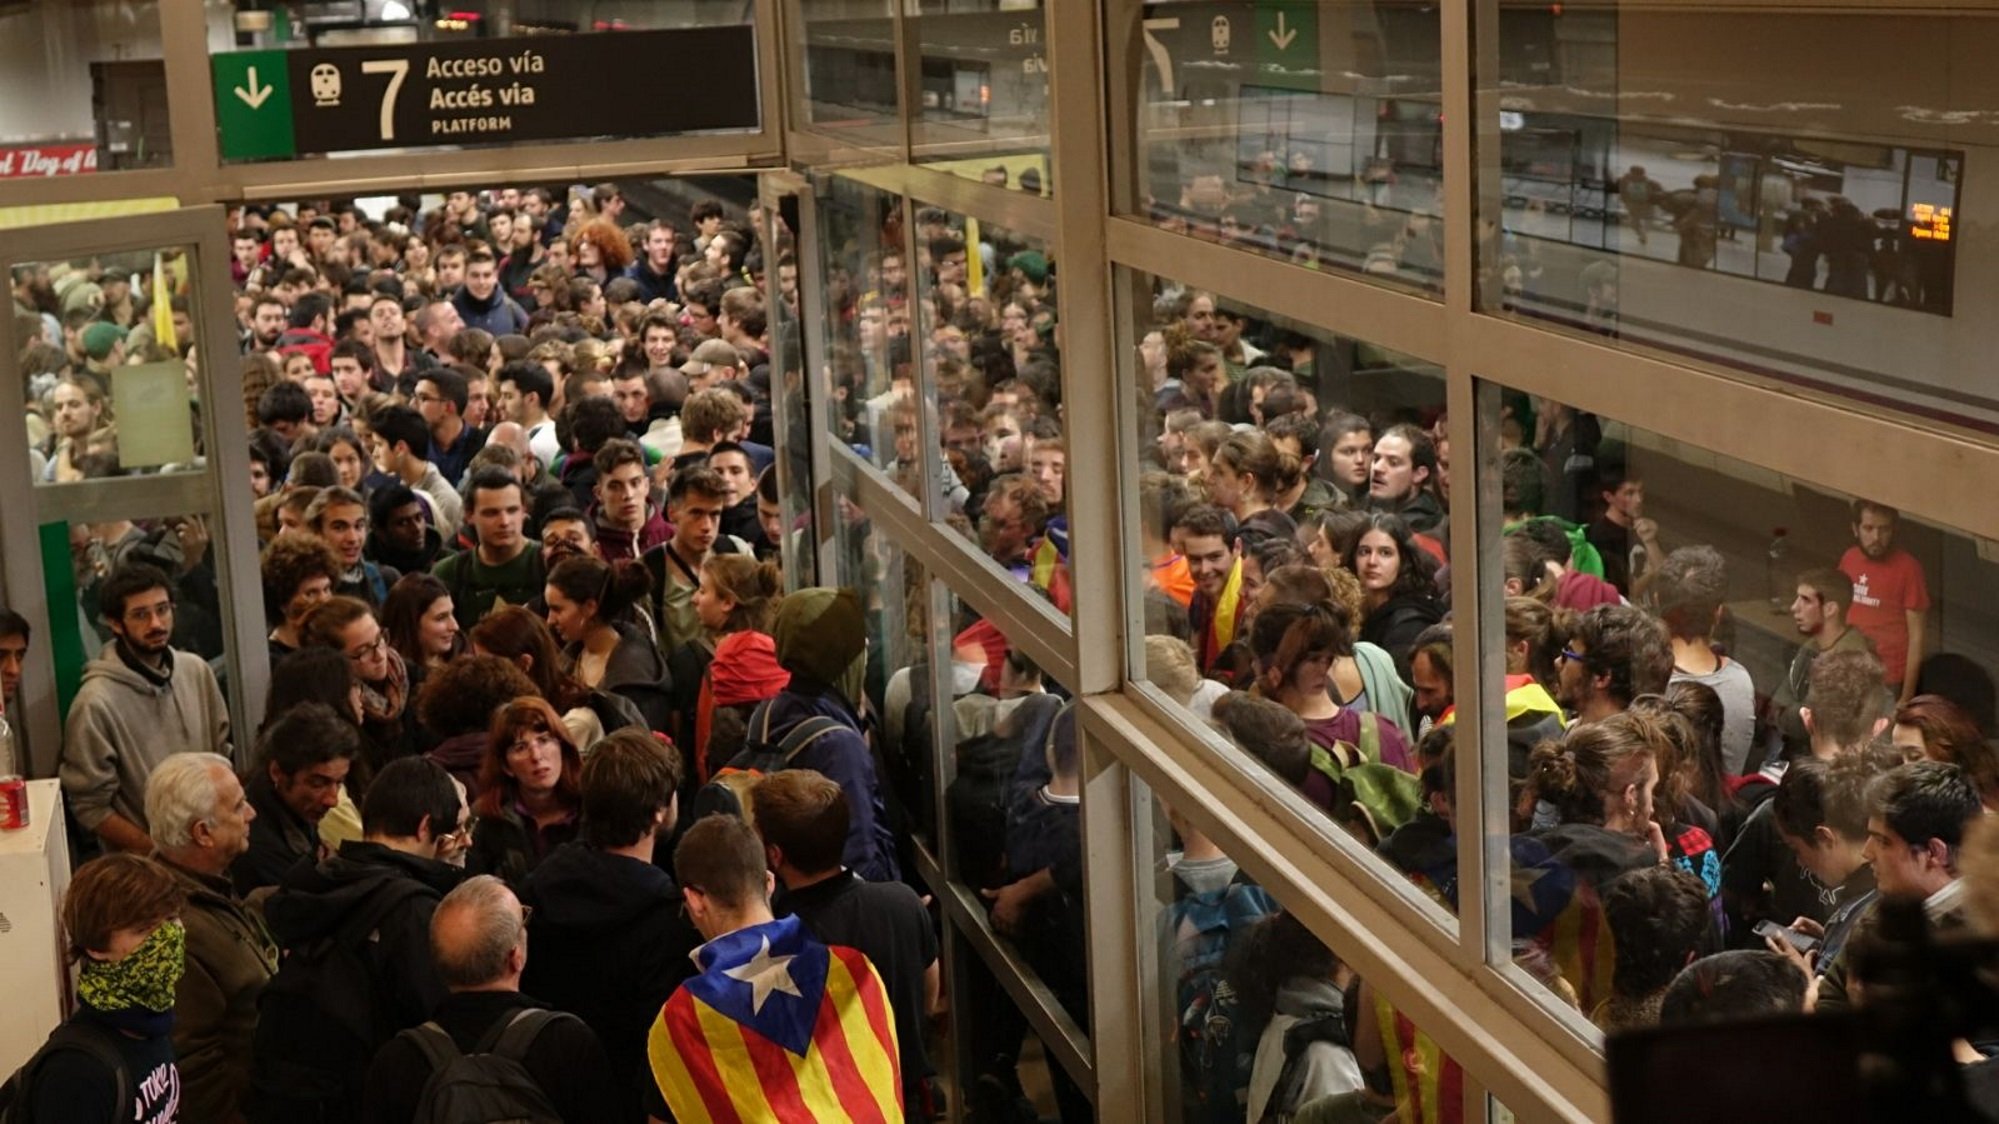 The 'countrywide standstill' blocks the border and trains to Madrid